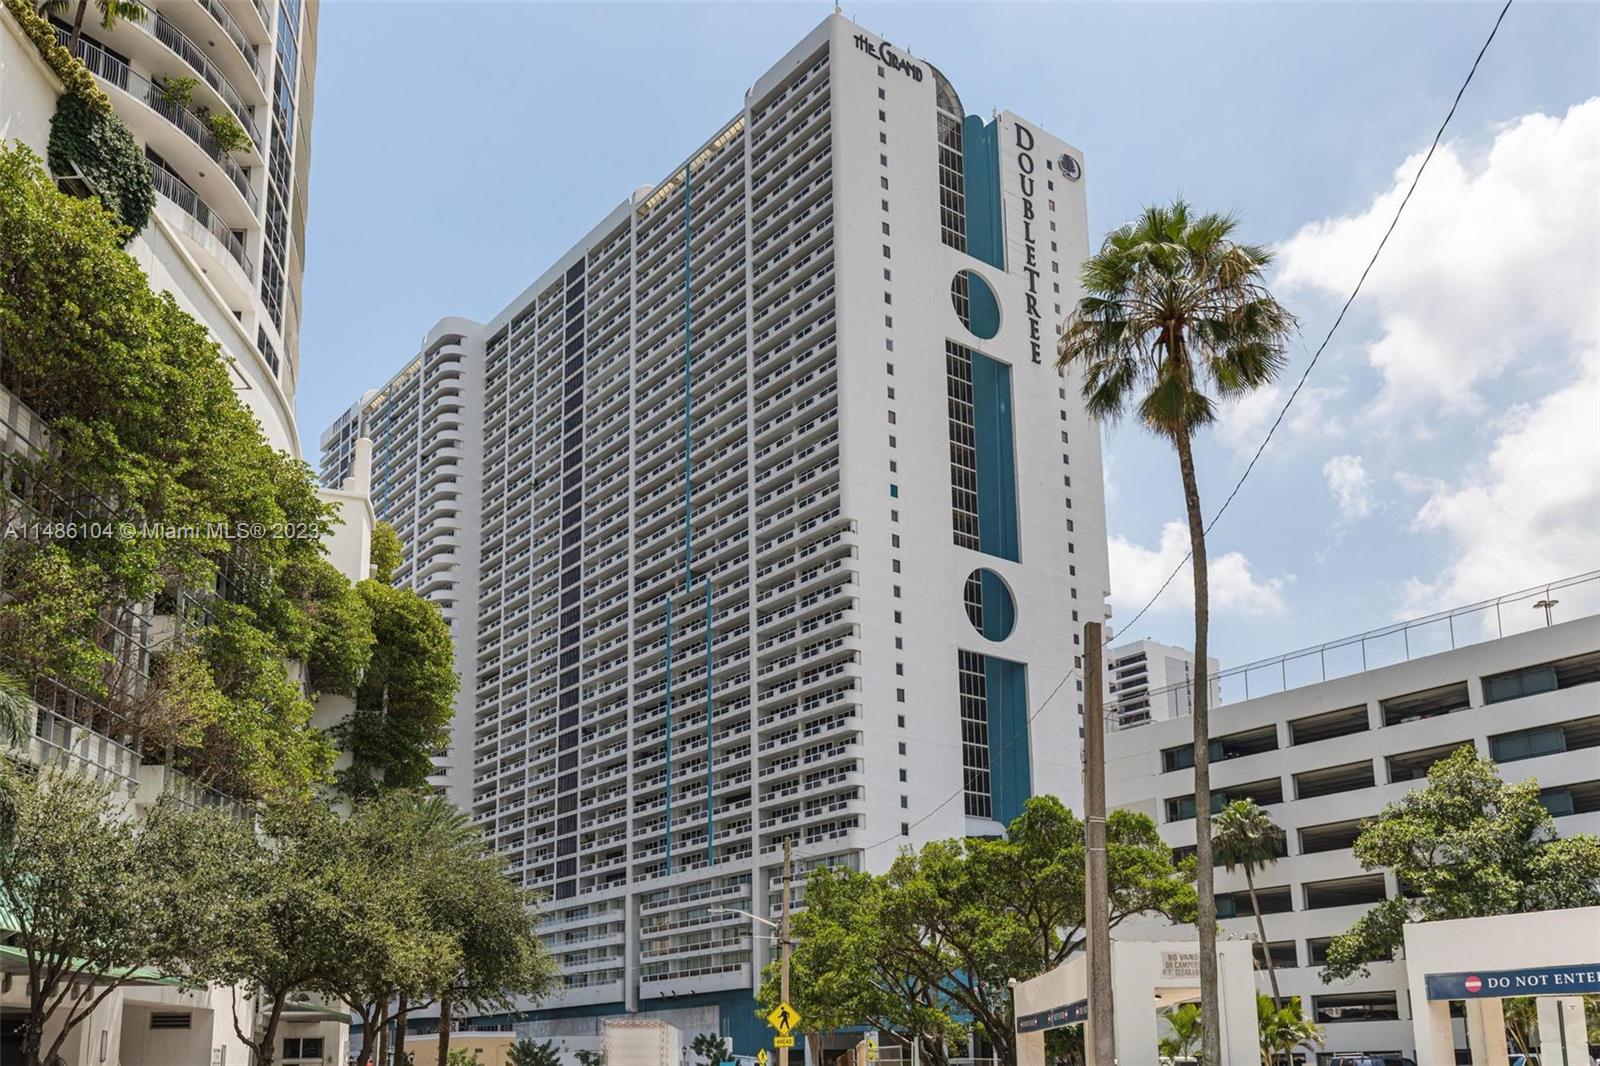 Absolutely stunning and completely remodeled Unit at THE GRAND with beautiful views of Biscayne Bay, located in Edgewater. Enjoy water views from the living room, master room and the custom made kitchen. Freshly painted, with new flooring, impact windows, and modern Washer and Dryer in unit. The building has a resort style pool, gym, shops & restaurants, hair salon, dry cleaners, marina and much more. The Grand boasts a premier location within Miami's Art and Entertainment district. 10 minutes from Miami Beach, 10 minutes from Wyndwood and Brickell. Walking distance to museums, theaters, sports and entertainment arenas, and much more.